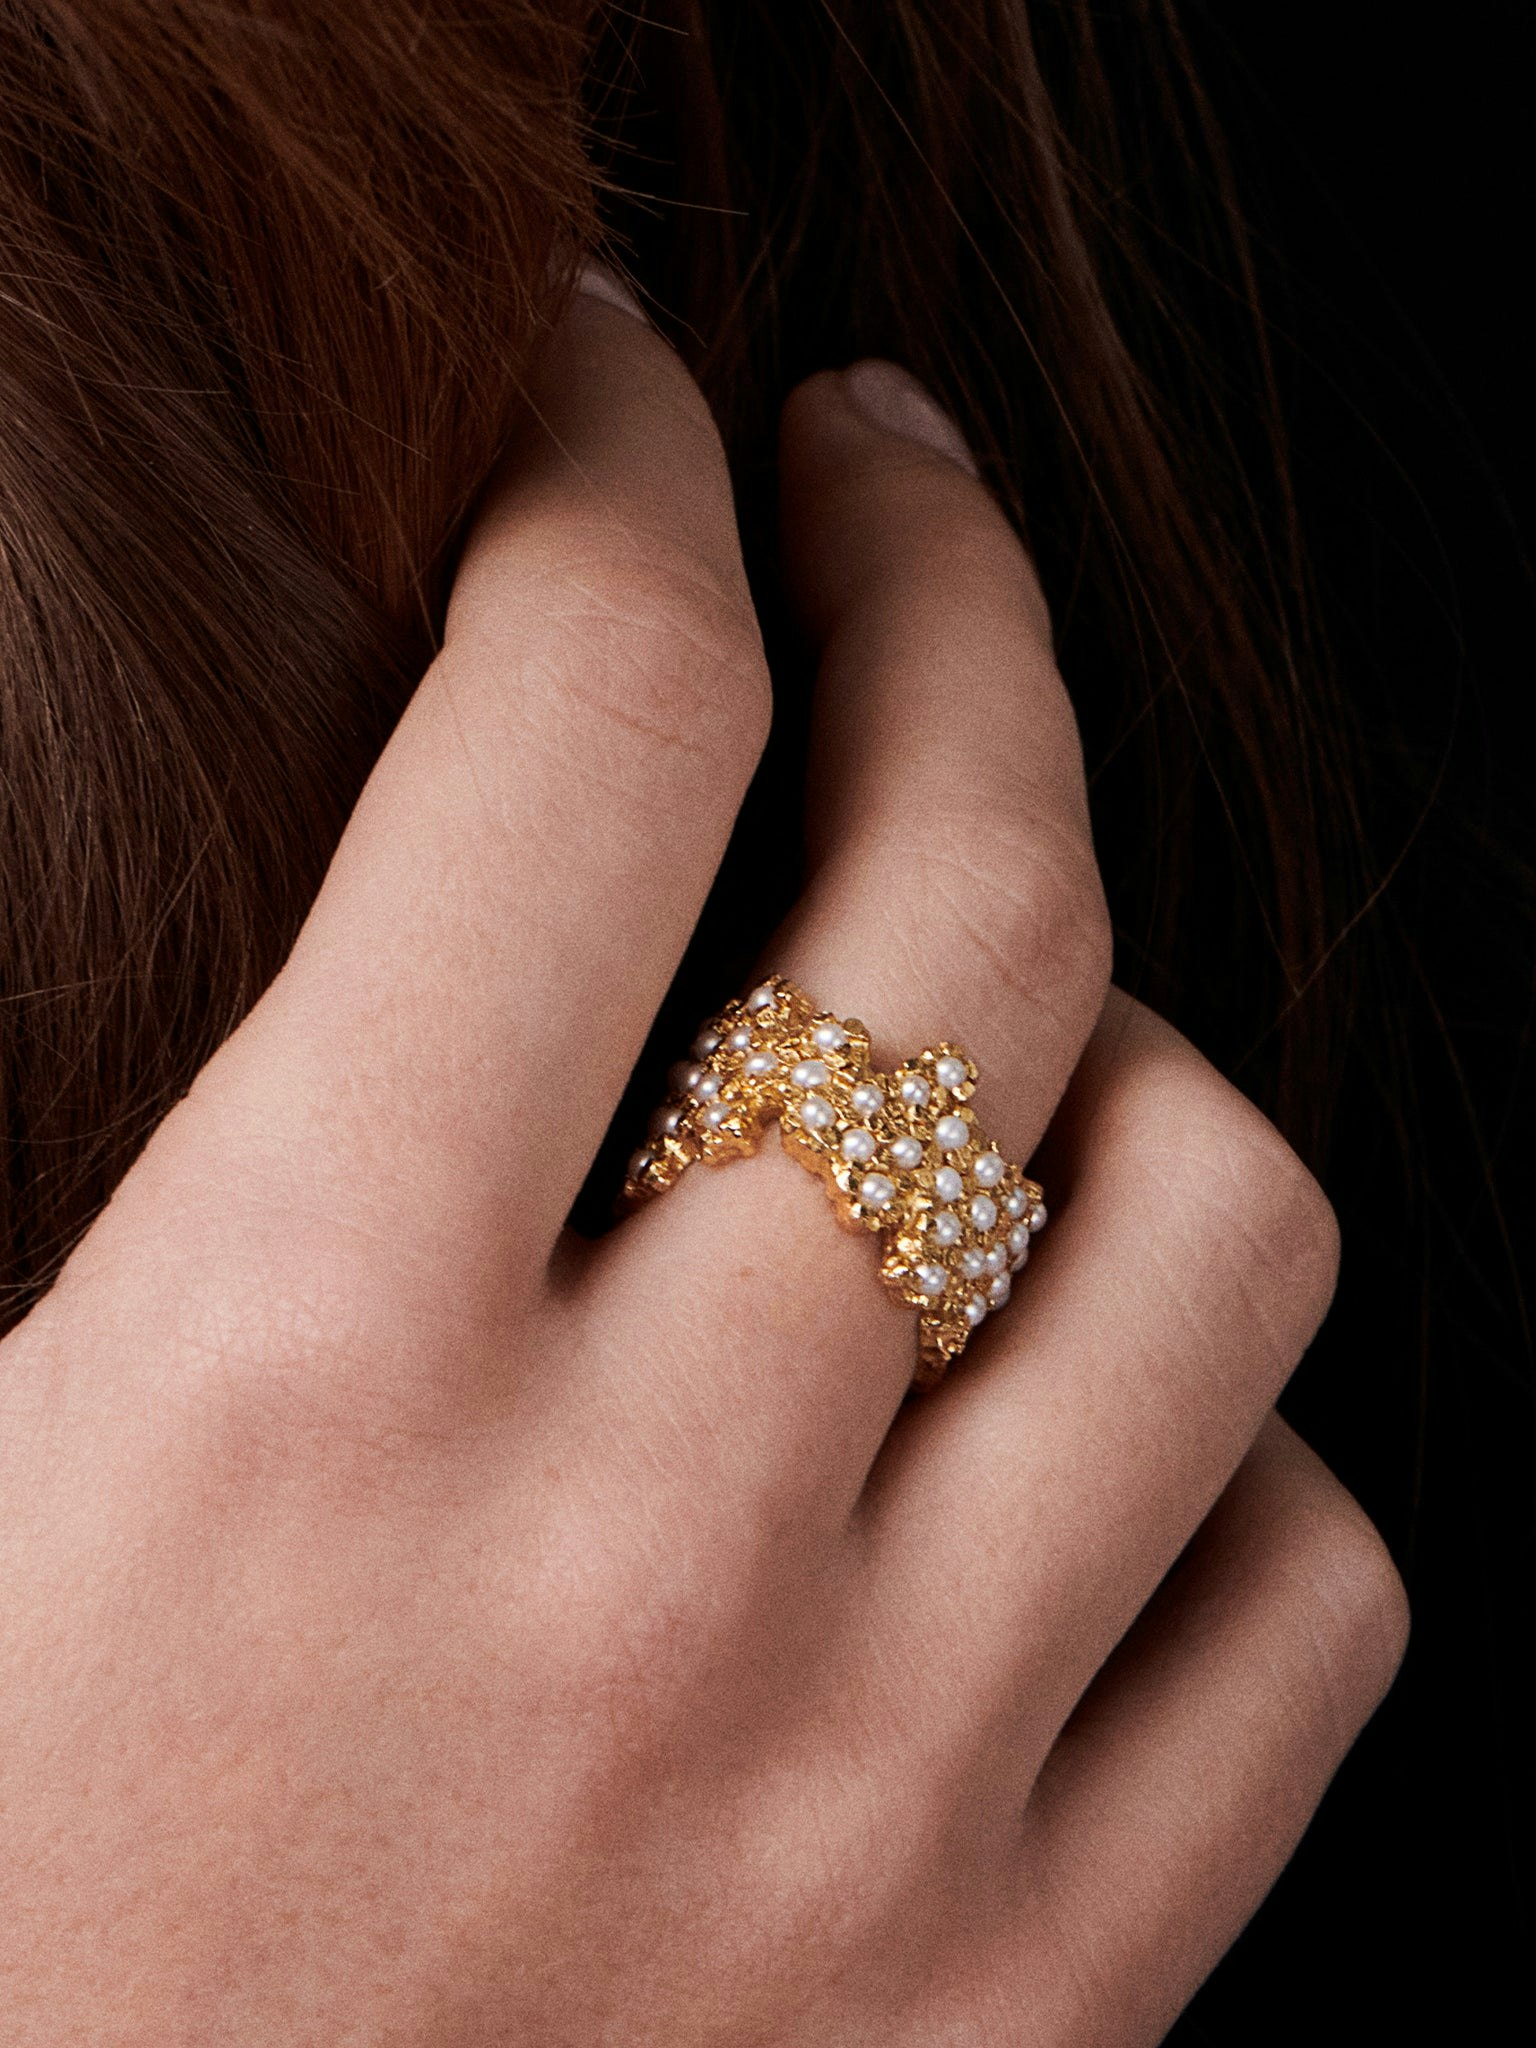 Floret pearl ring photo 2